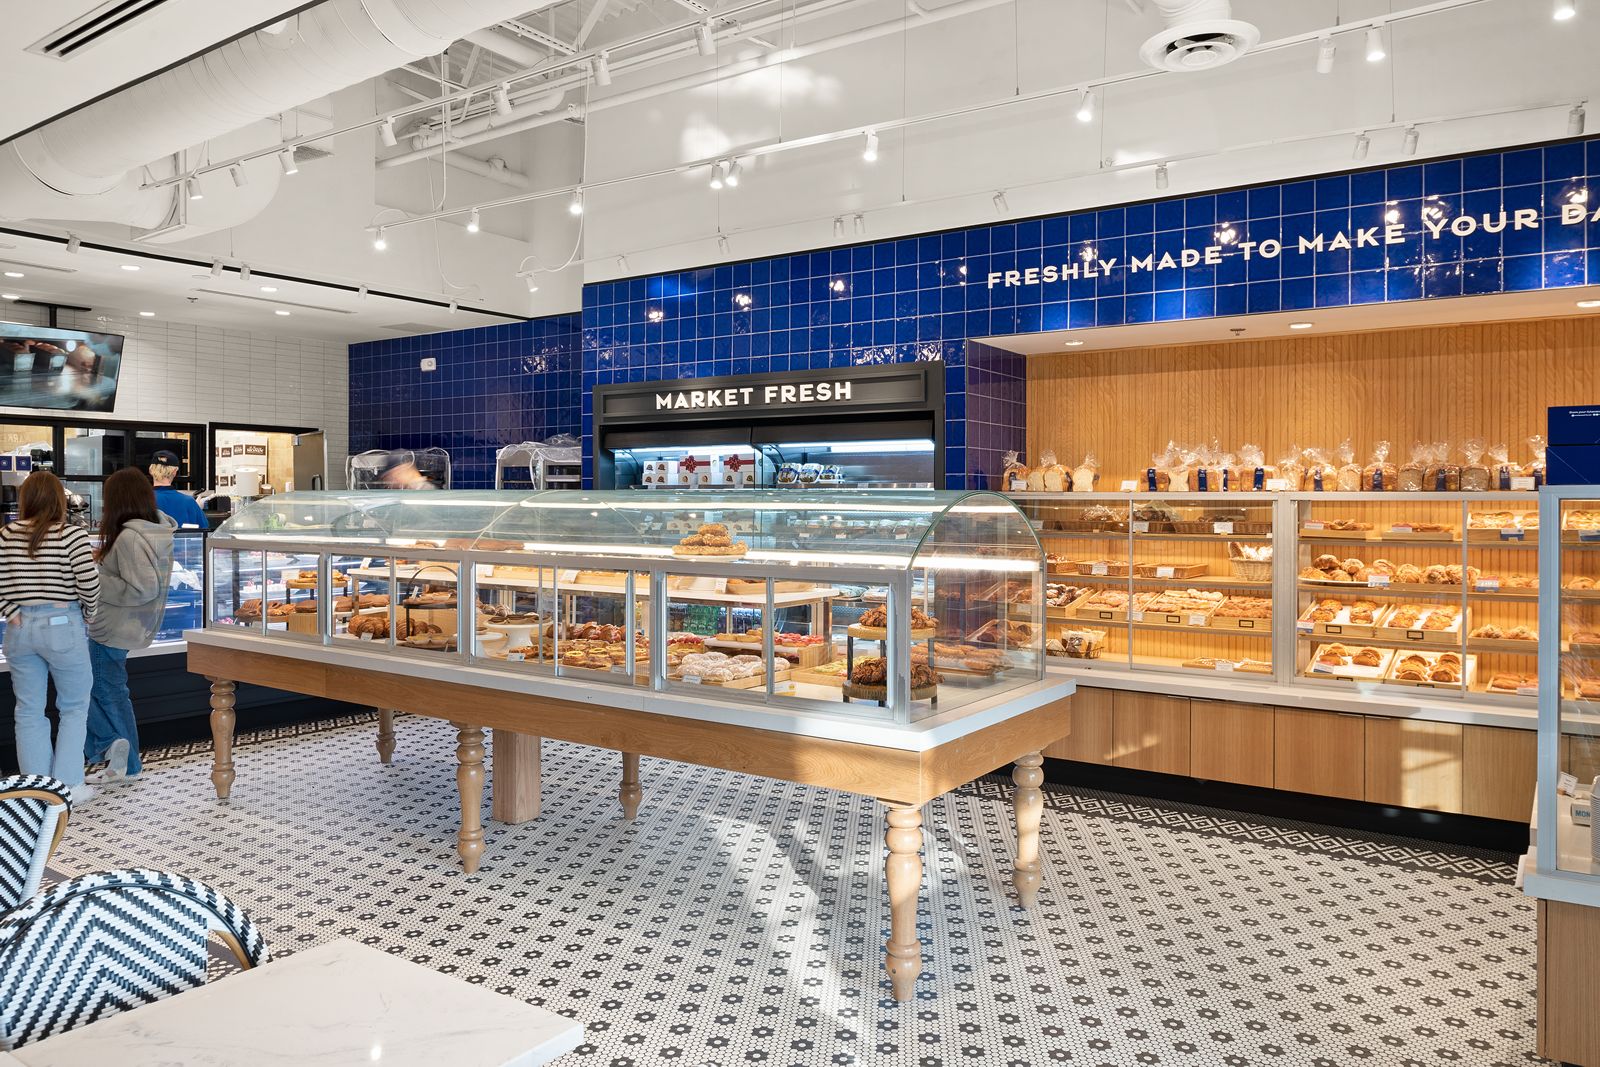 Paris Baguette Continues To Dominate the Bakery Franchise Industry; New Bakery Café Opens in Montvale February 9th